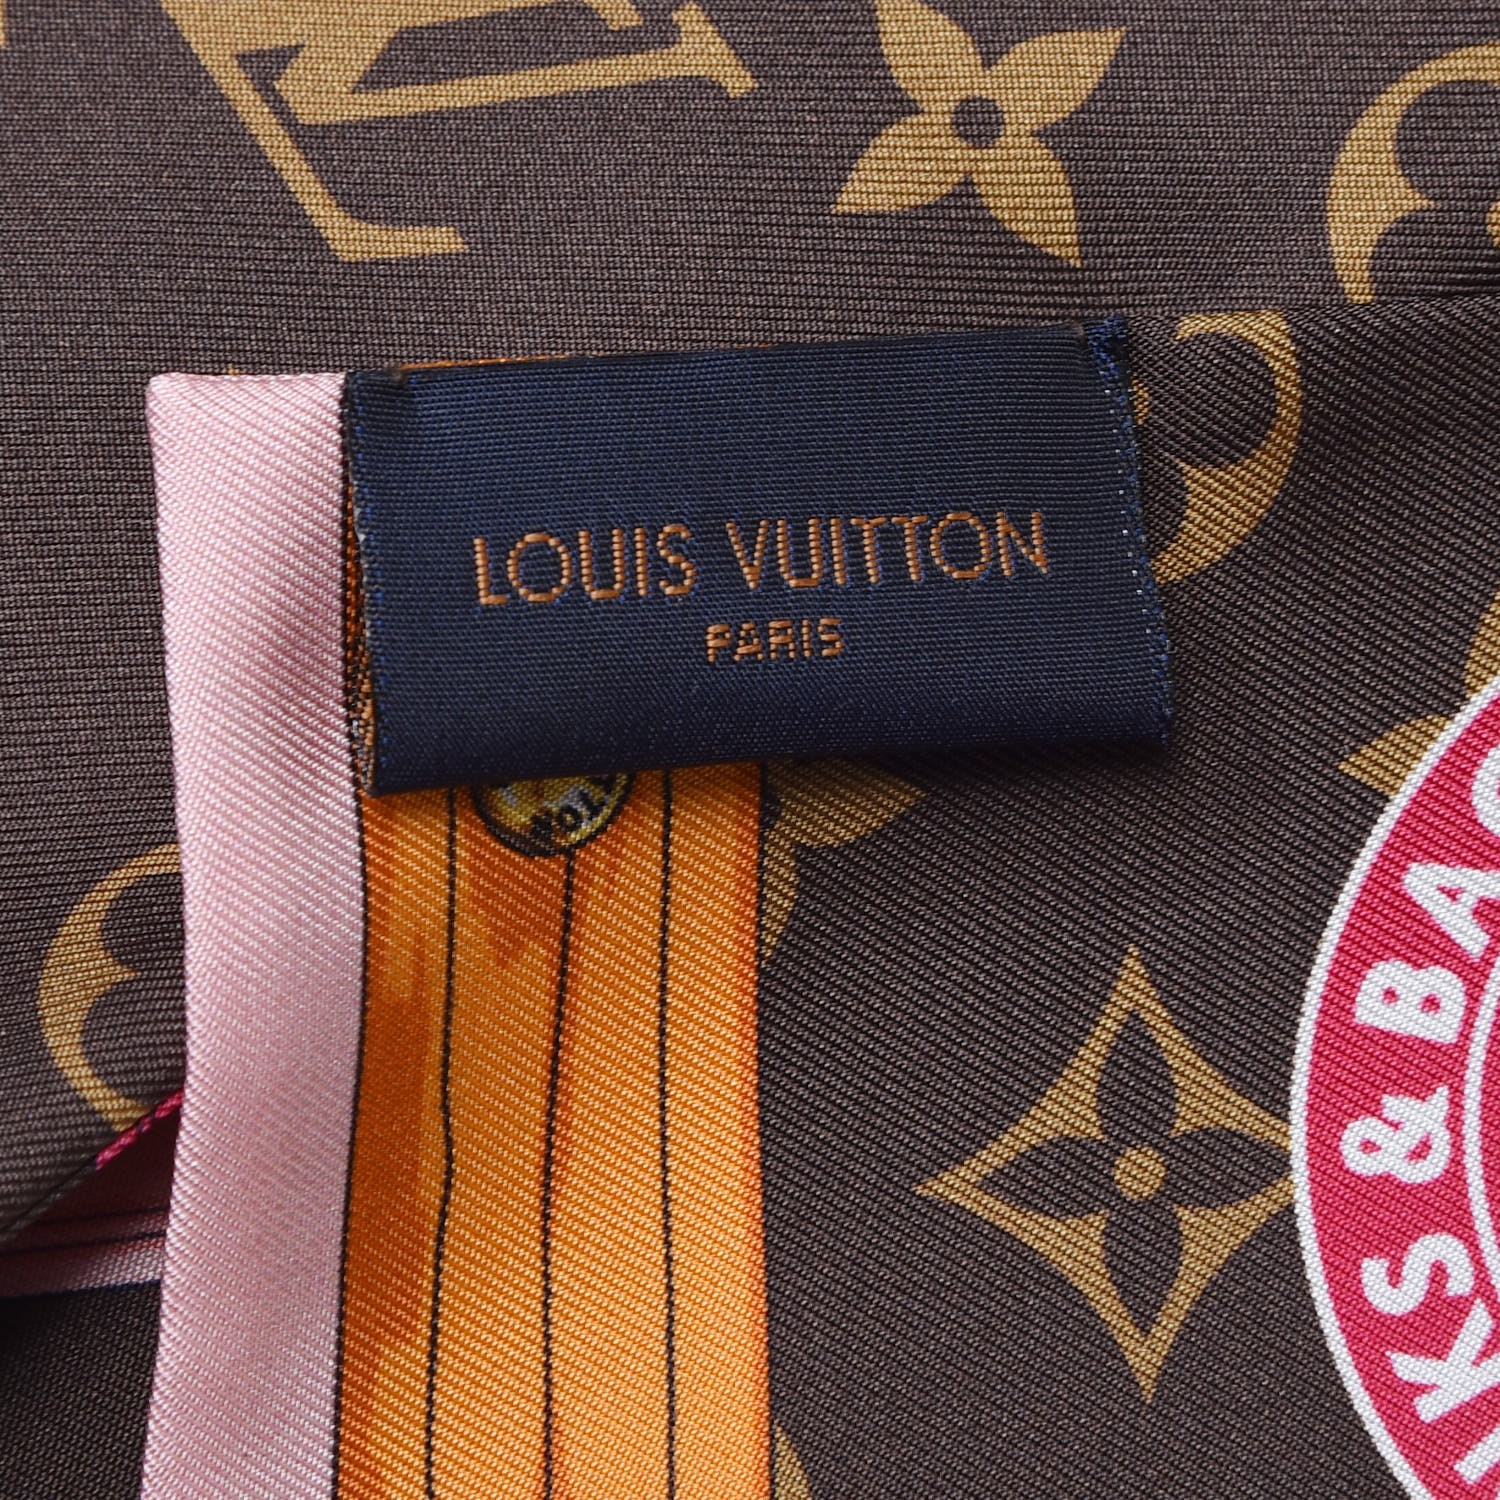 LV bandeau twilly - Escale collection limited edition